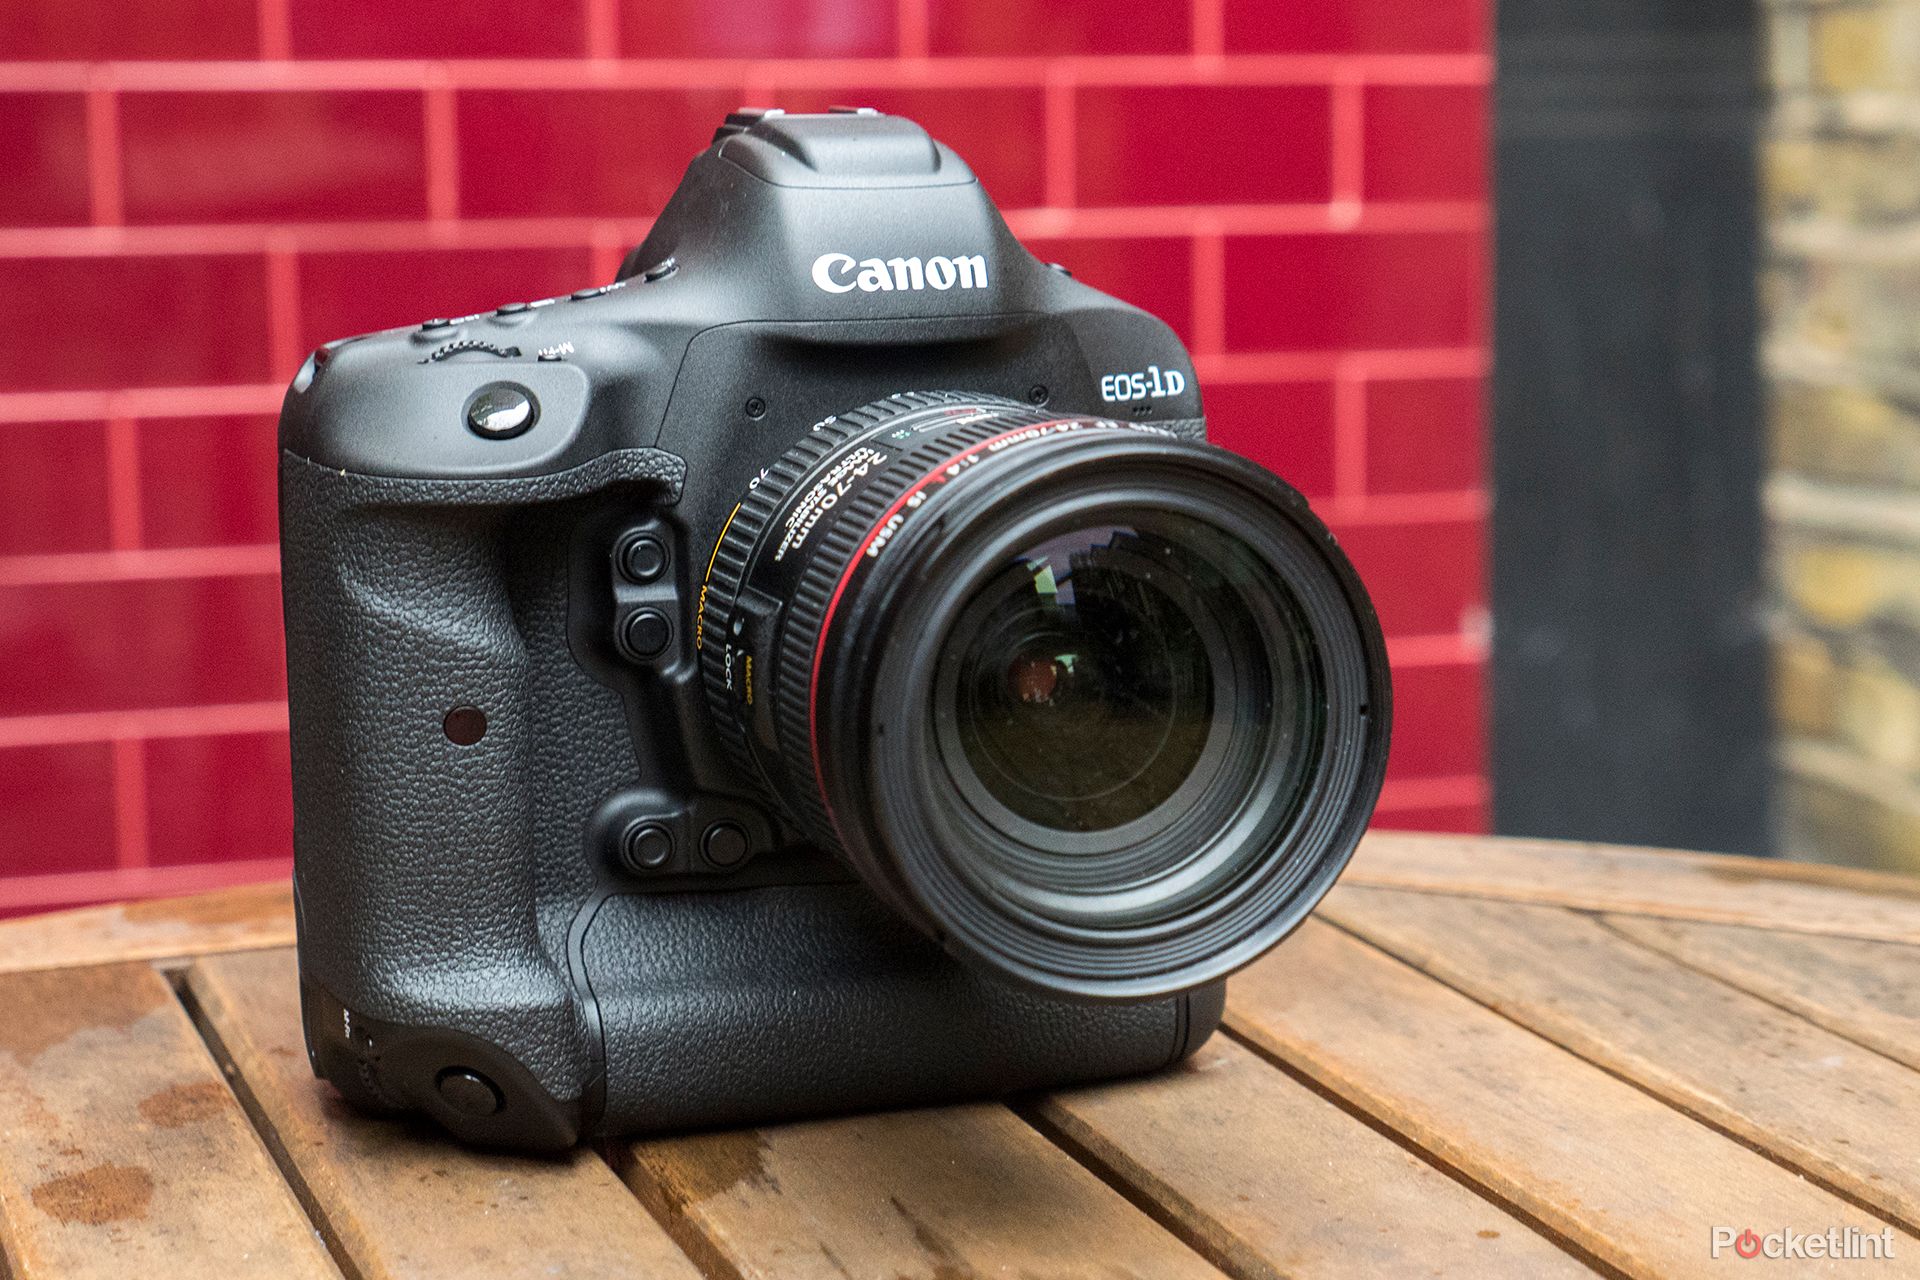 canon eos 1d x mark ii review image 1